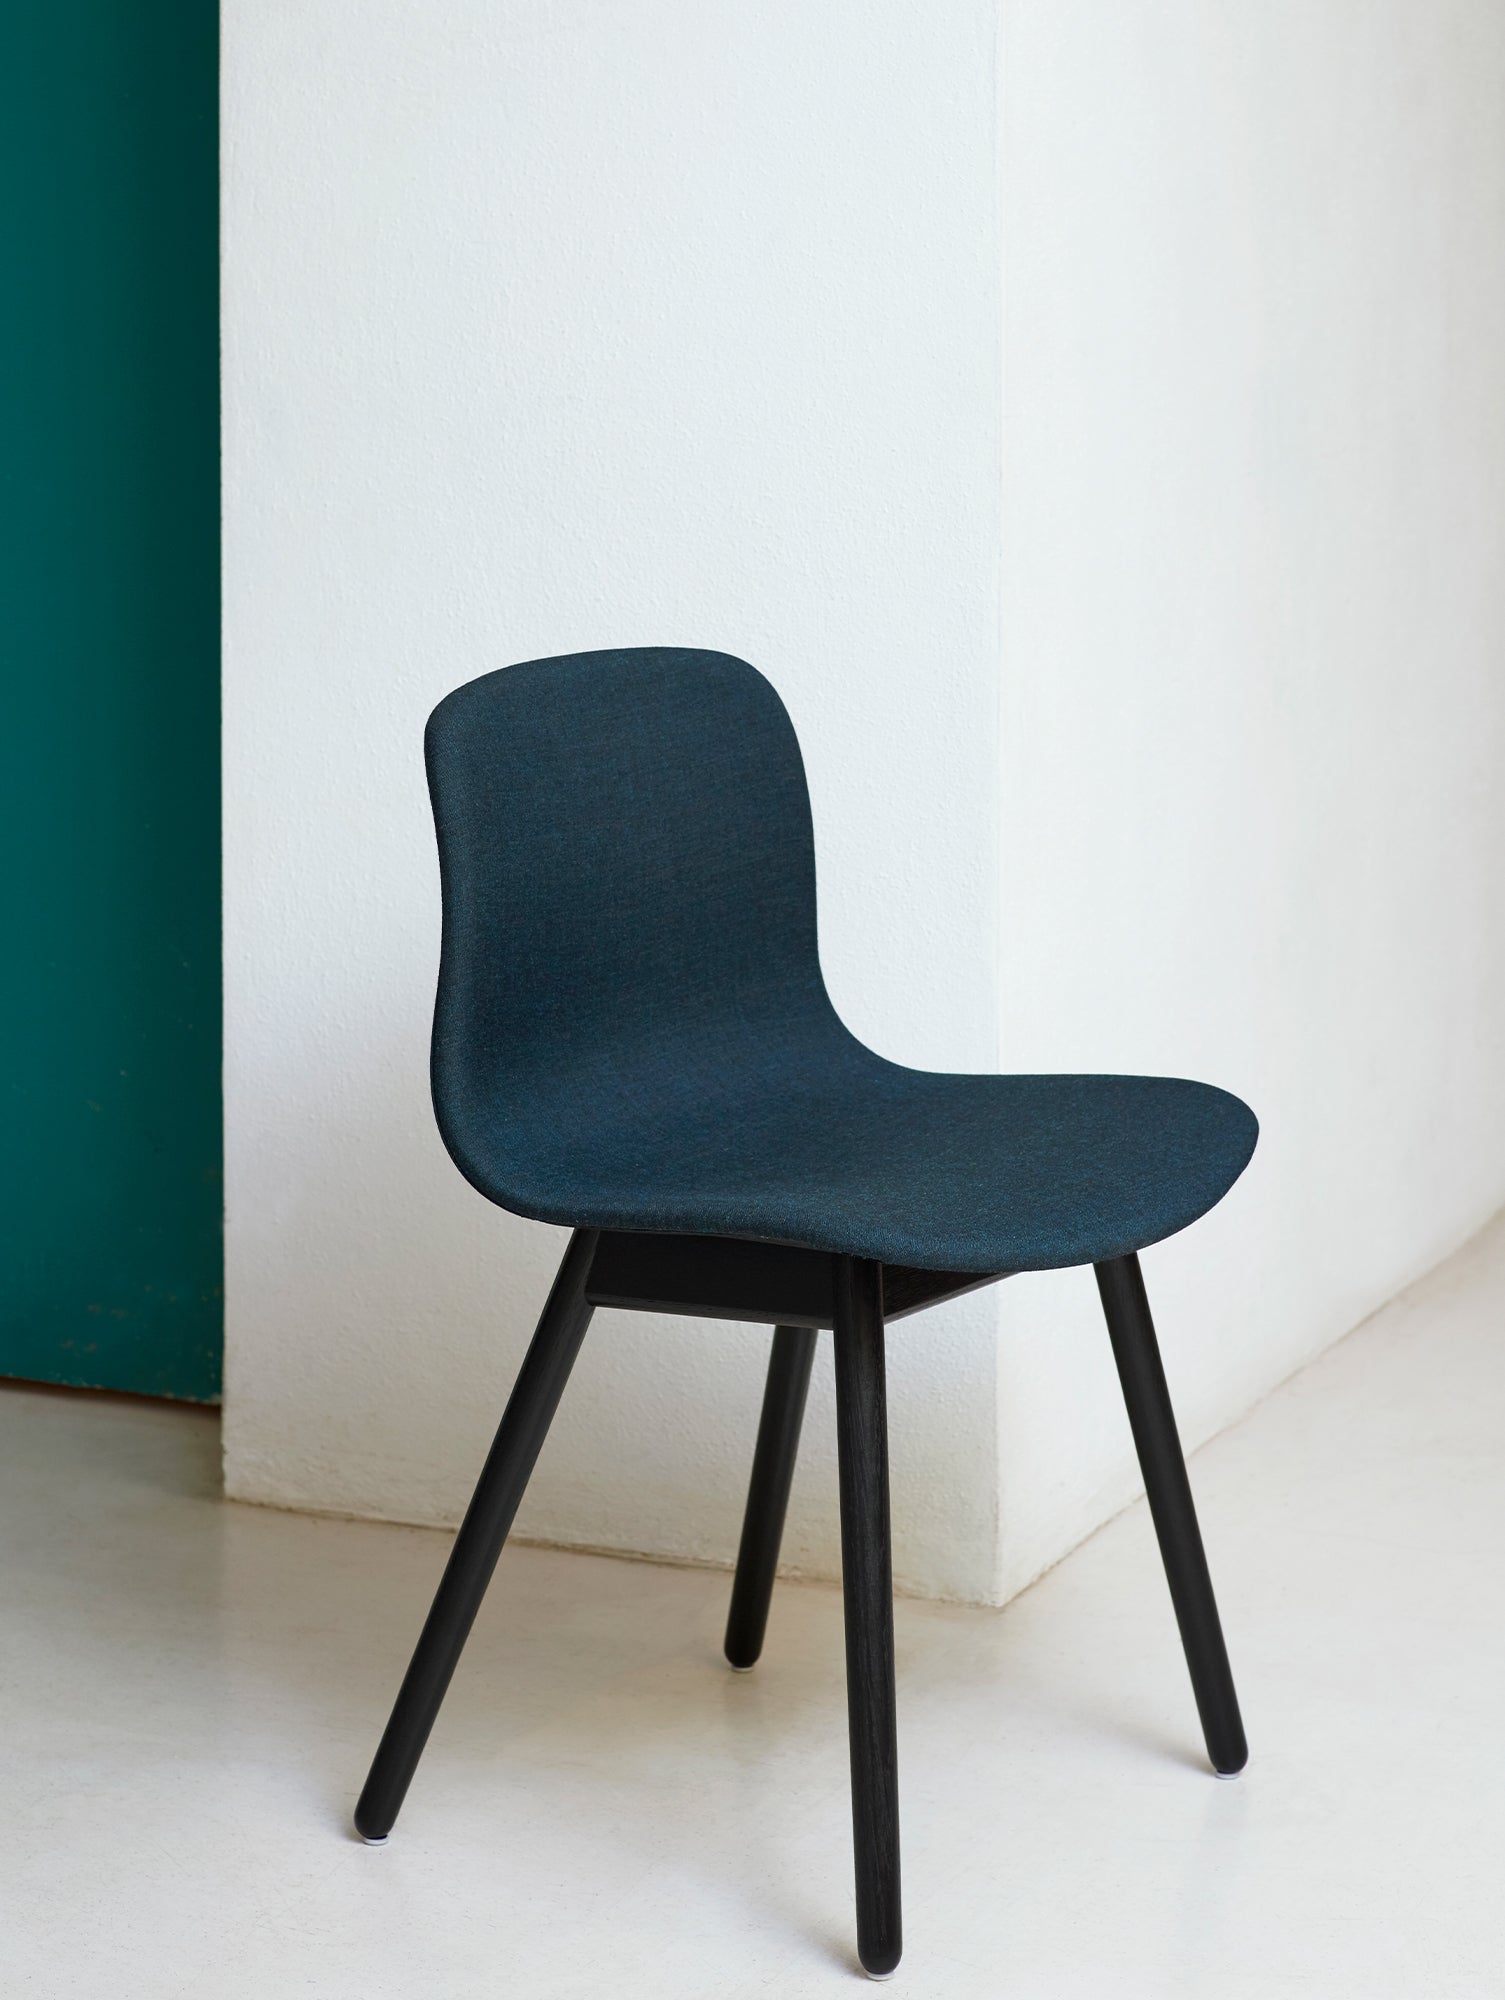 About A Chair AAC 13 by HAY - Remix 873 / Black Lacquered Oak